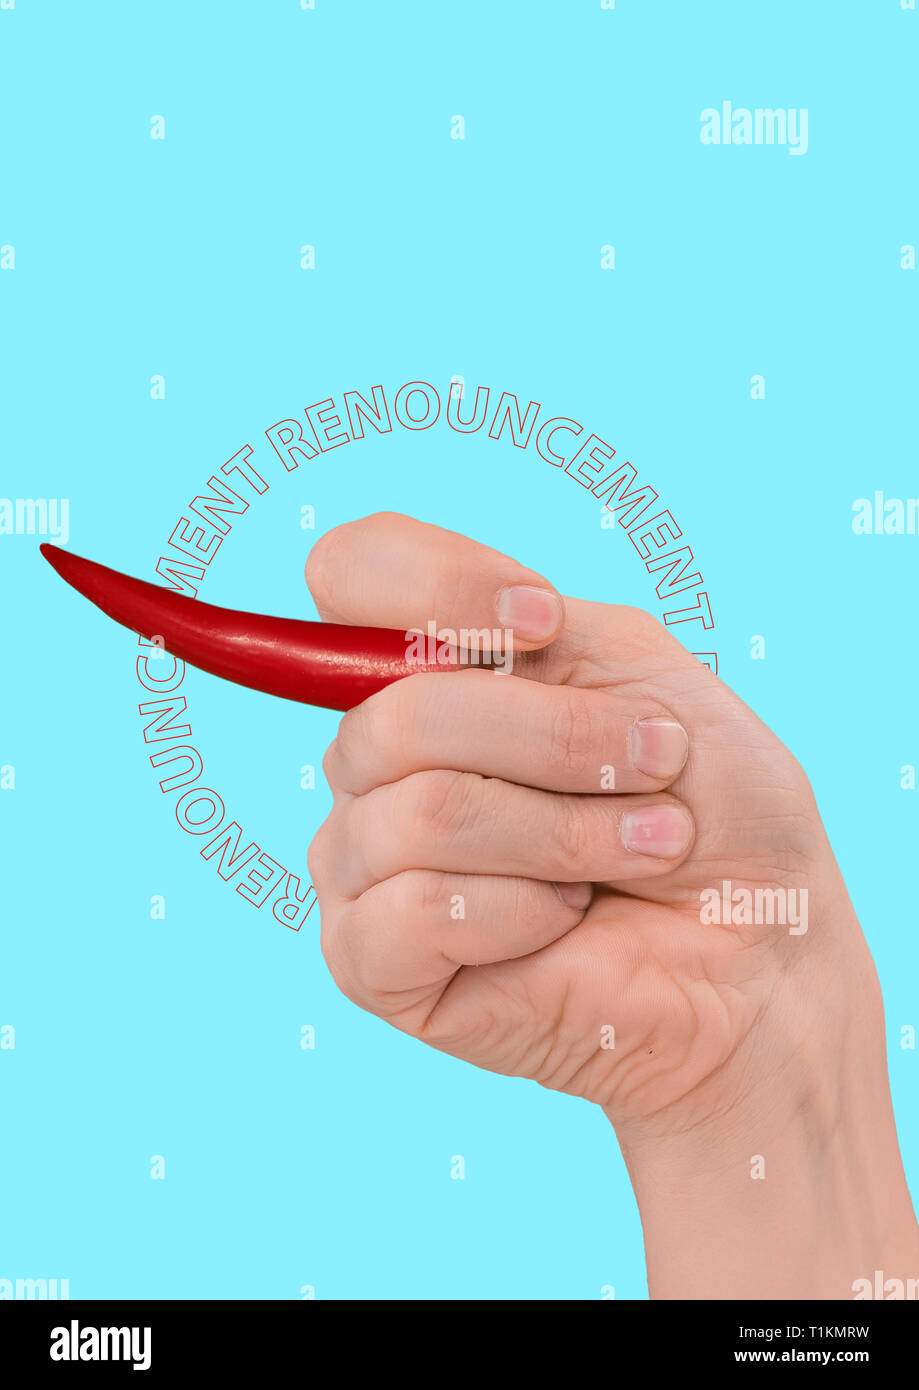 Renouncement. Heated arguments. Male hand with red hot chilli pepper as a thumb against blue background. Disagree with other opinions. Negative answer concept. Modern design. Contemporary art collage. Stock Photo